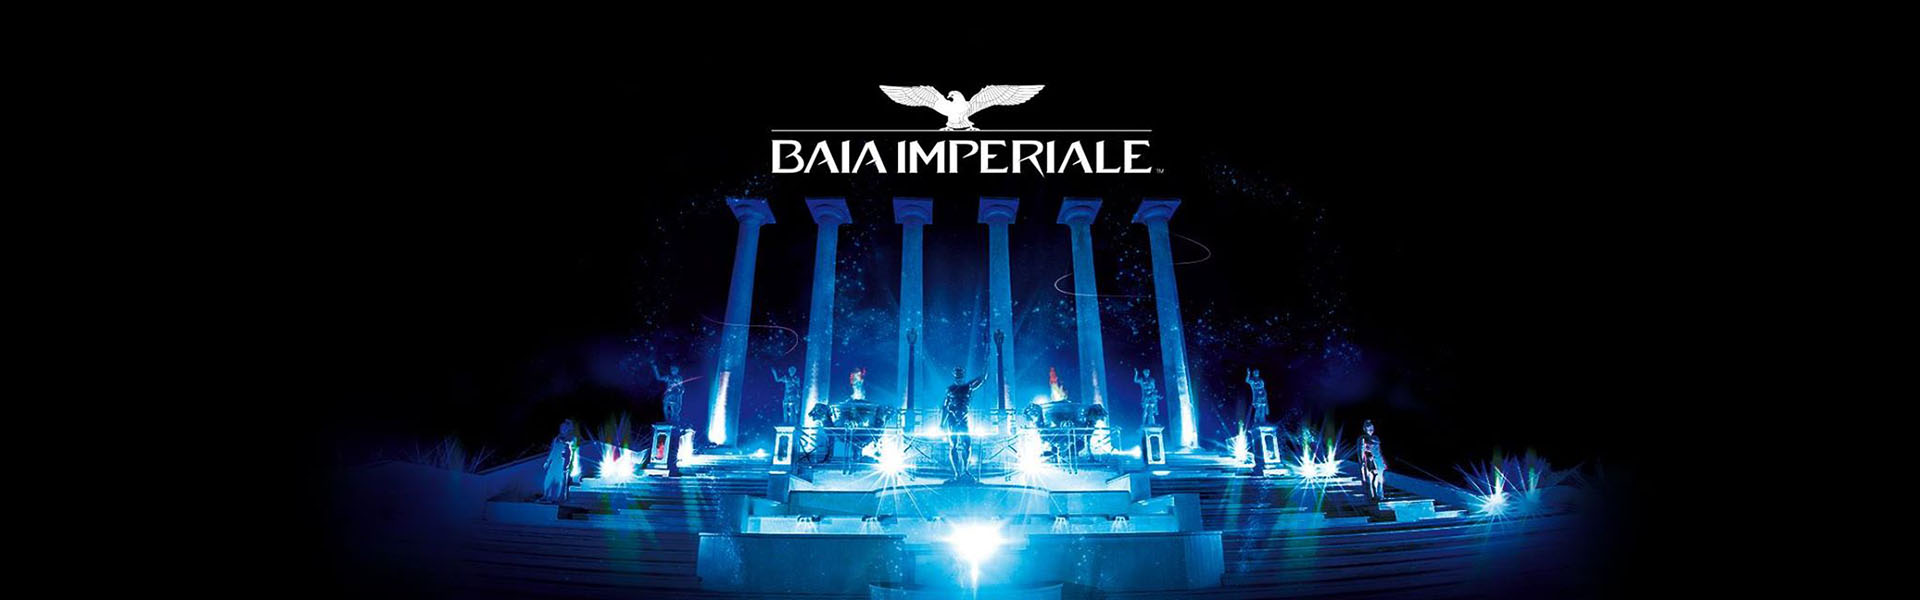 Baia Imperiale Gabicce Mare, guest dj Ives V